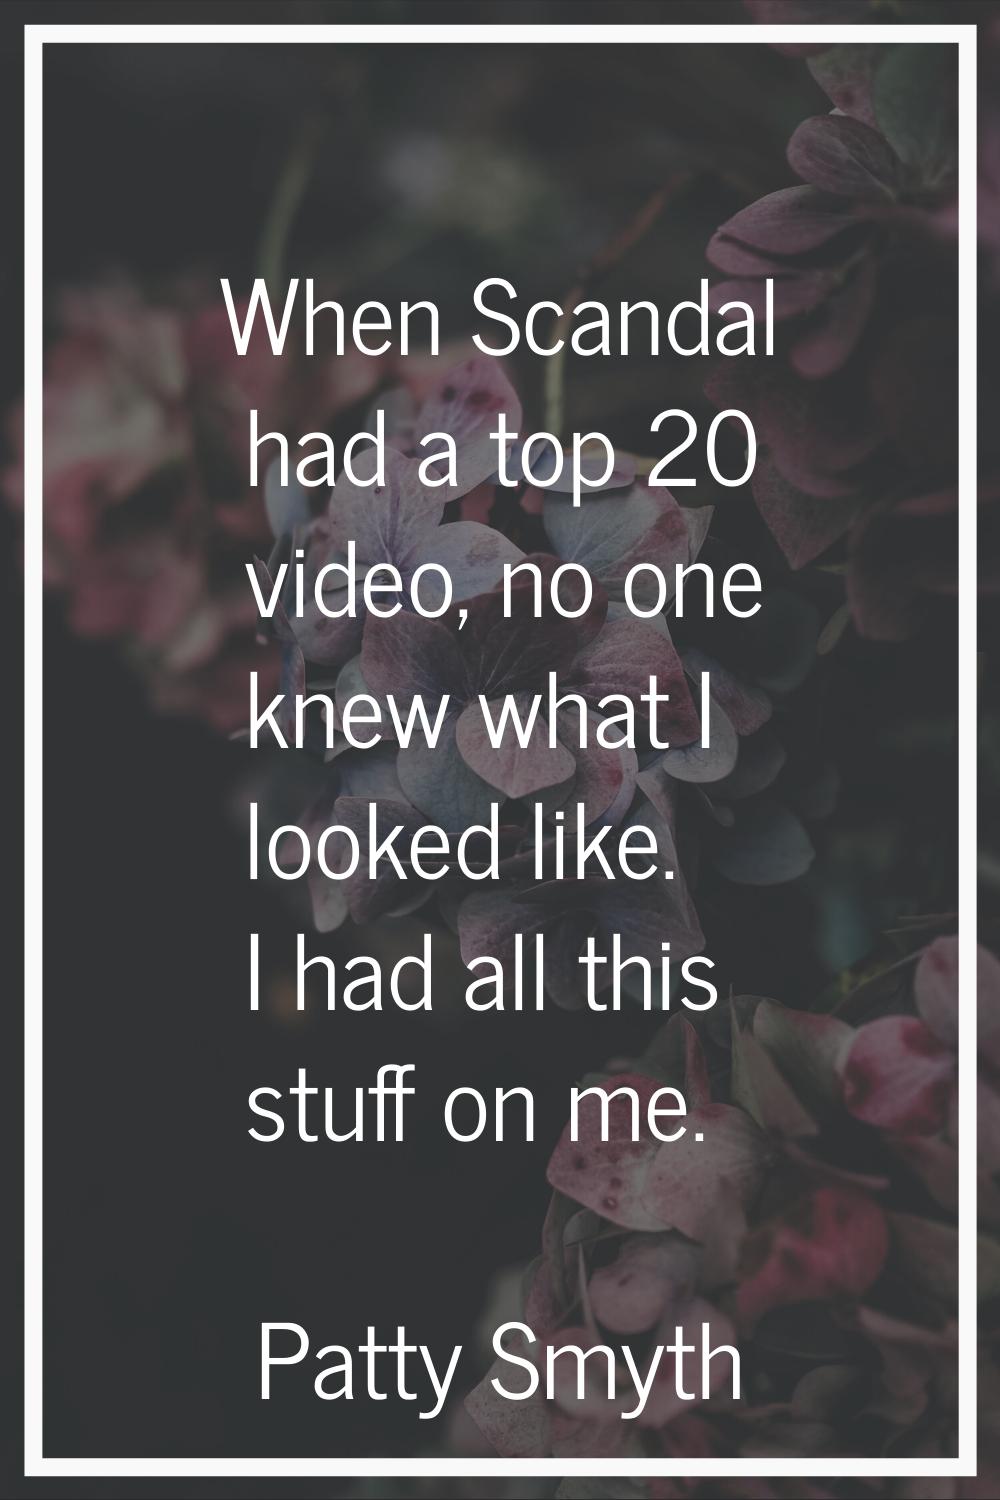 When Scandal had a top 20 video, no one knew what I looked like. I had all this stuff on me.